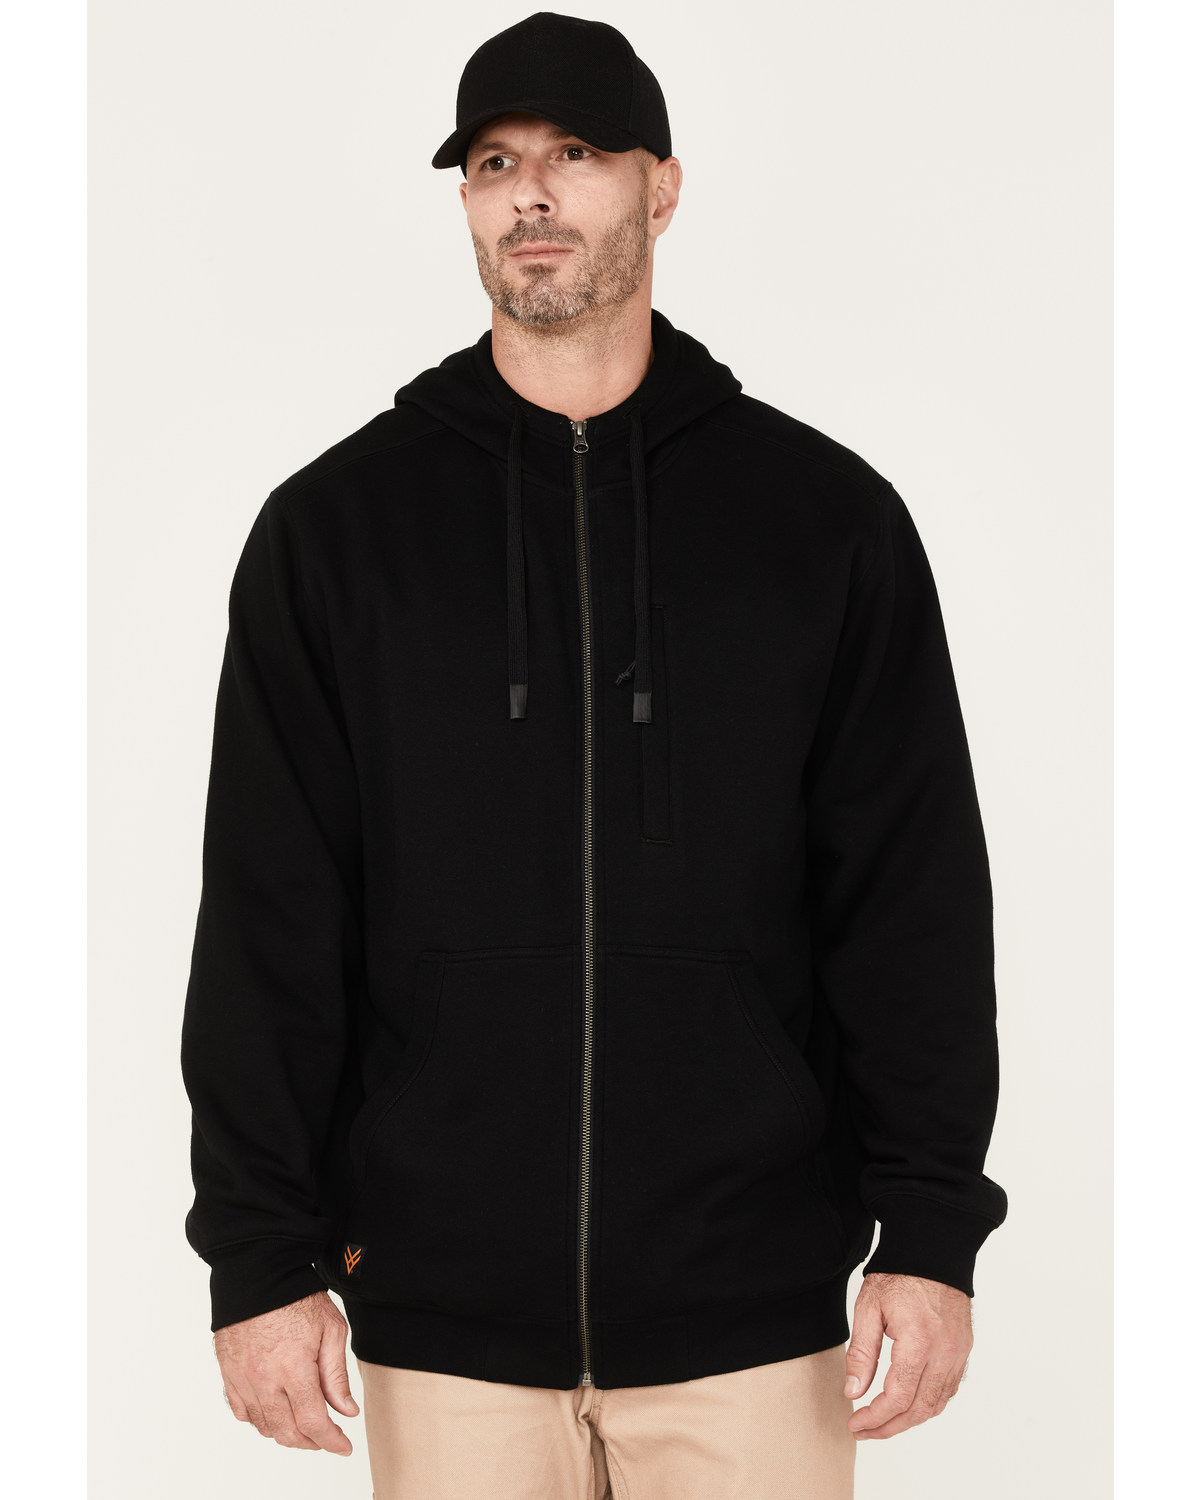 Hawx Men's Full Zip Thermal Lined Hooded Jacket - Big & Tall